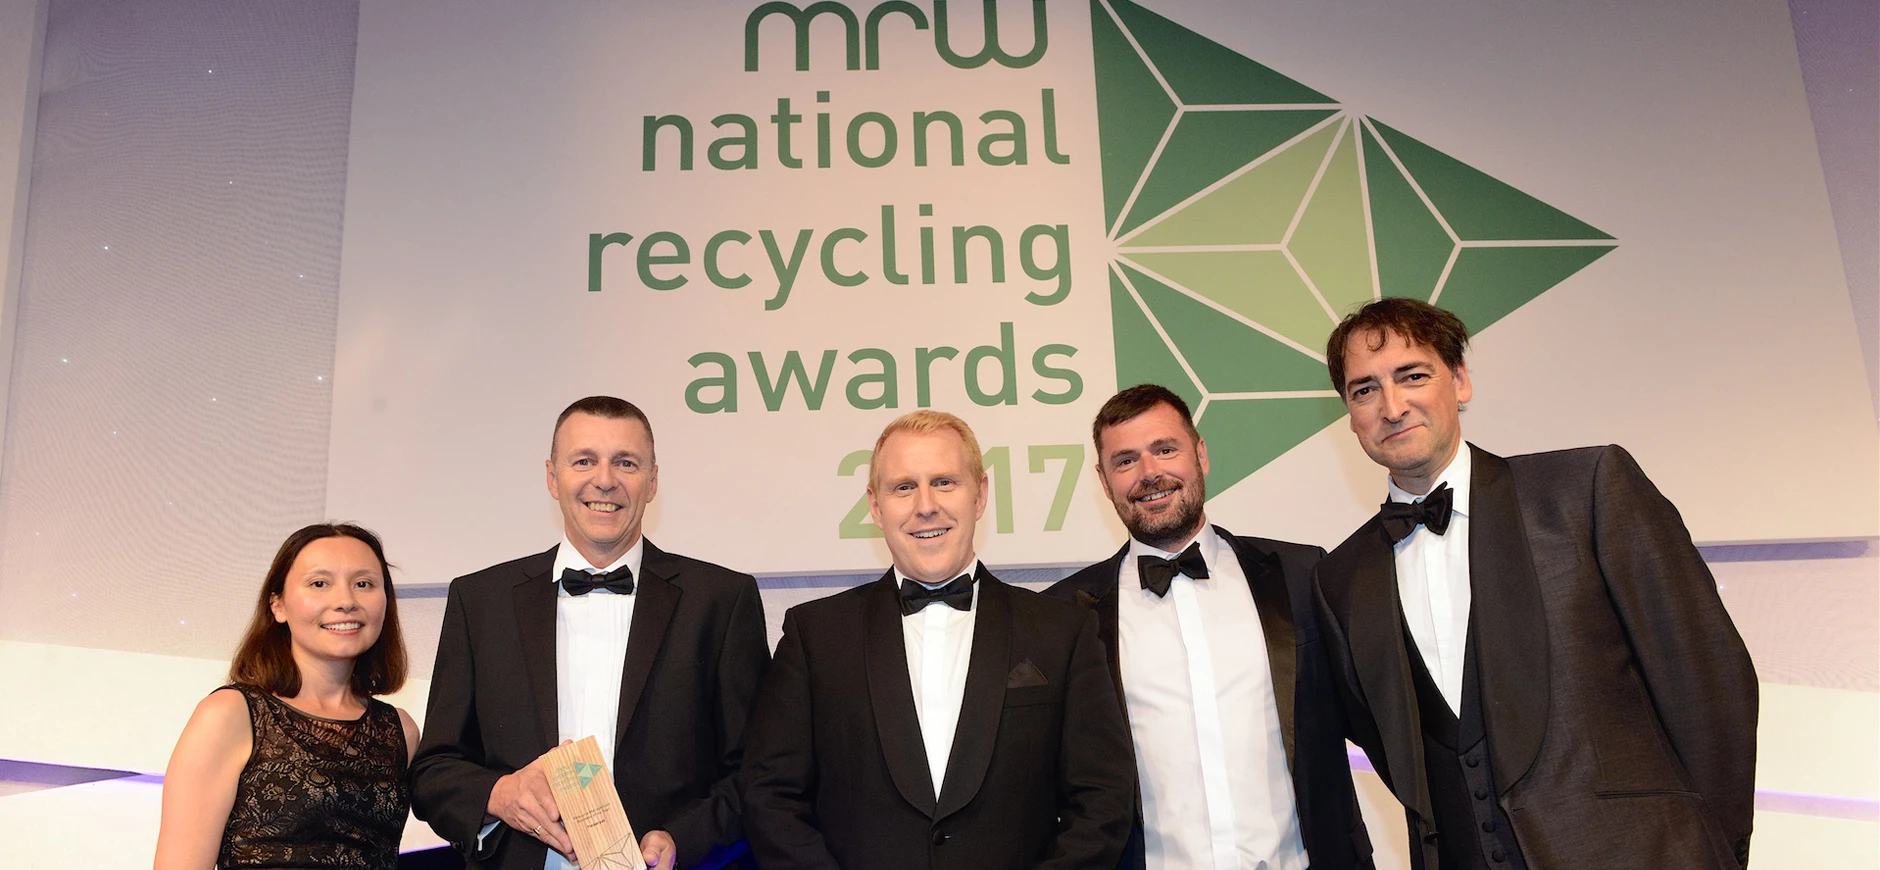 Timberpak winners are presented with their trophy. Left to right: Associate Editor of MRW, Andrea Lockerbie; Director Timberpak Limited, Mark Hayton; Customer Relationship Manager Timberpak Limited, Gavin Ball, Andy Berridge, Director Timberpak South East